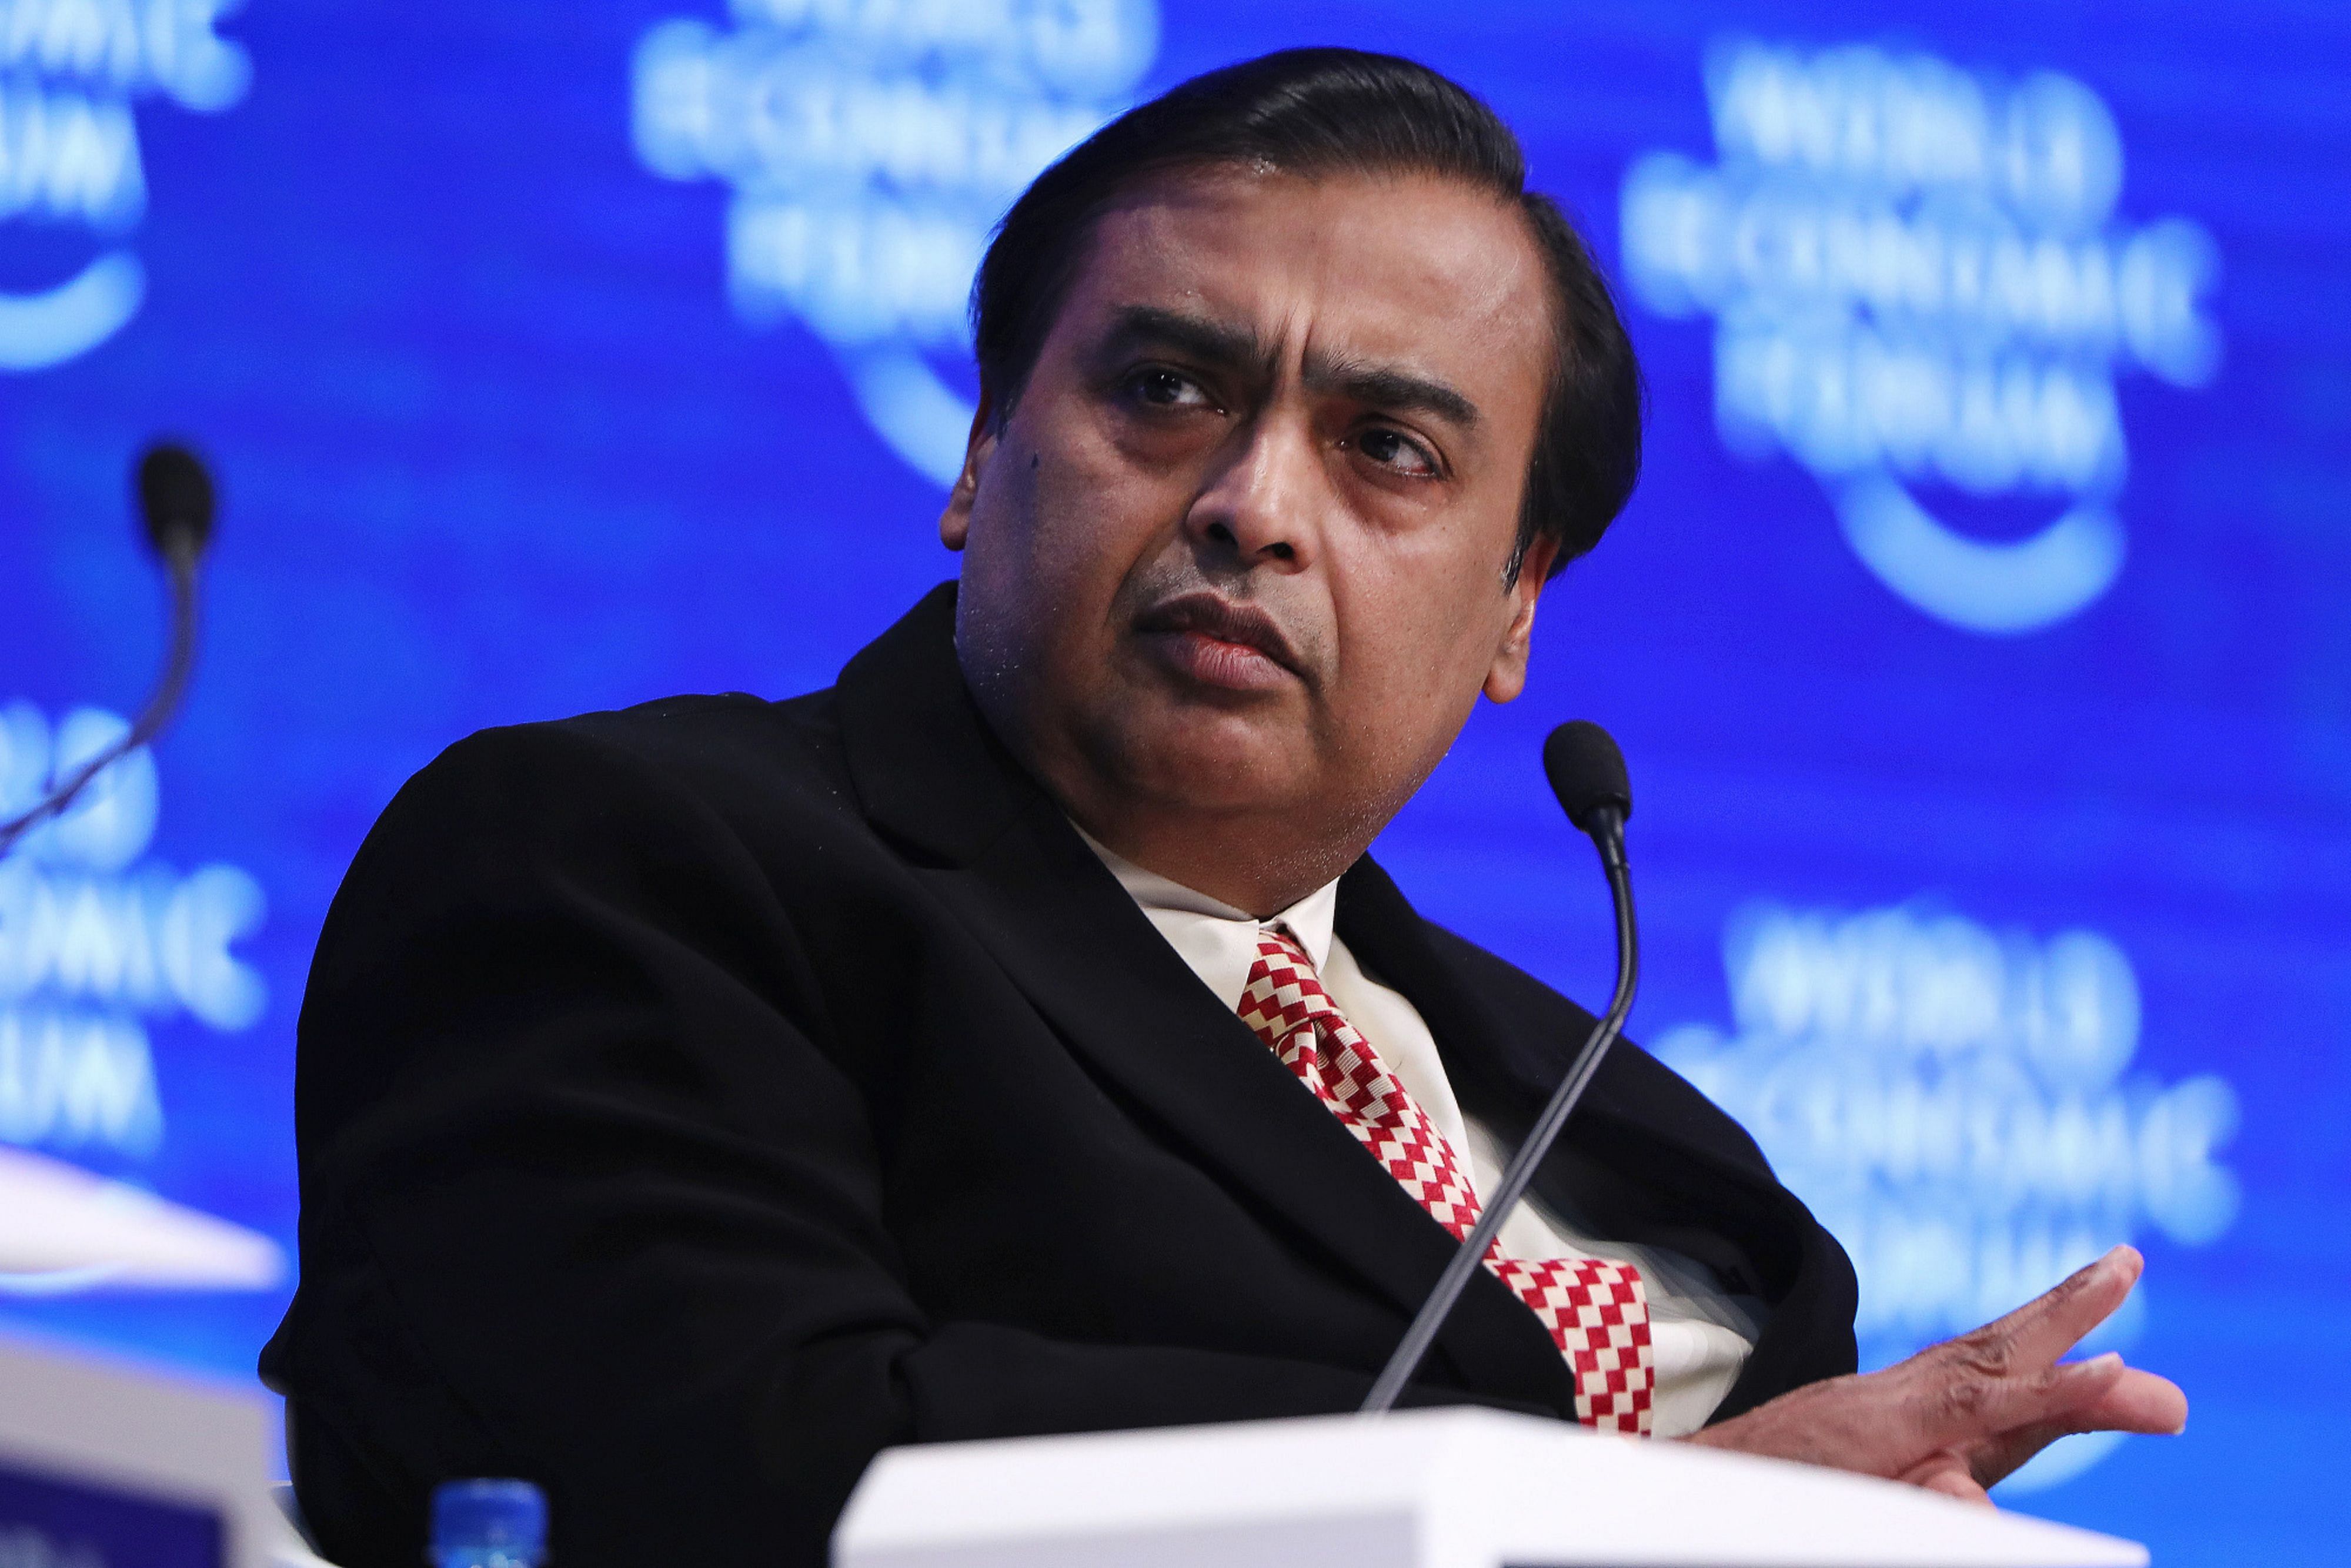 "Reliance is working to complete the contours of a strategic partnership with Saudi Aramco," Mukesh Ambani said in the firm's latest annual report without giving timelines. Credit: Bloomberg Photo